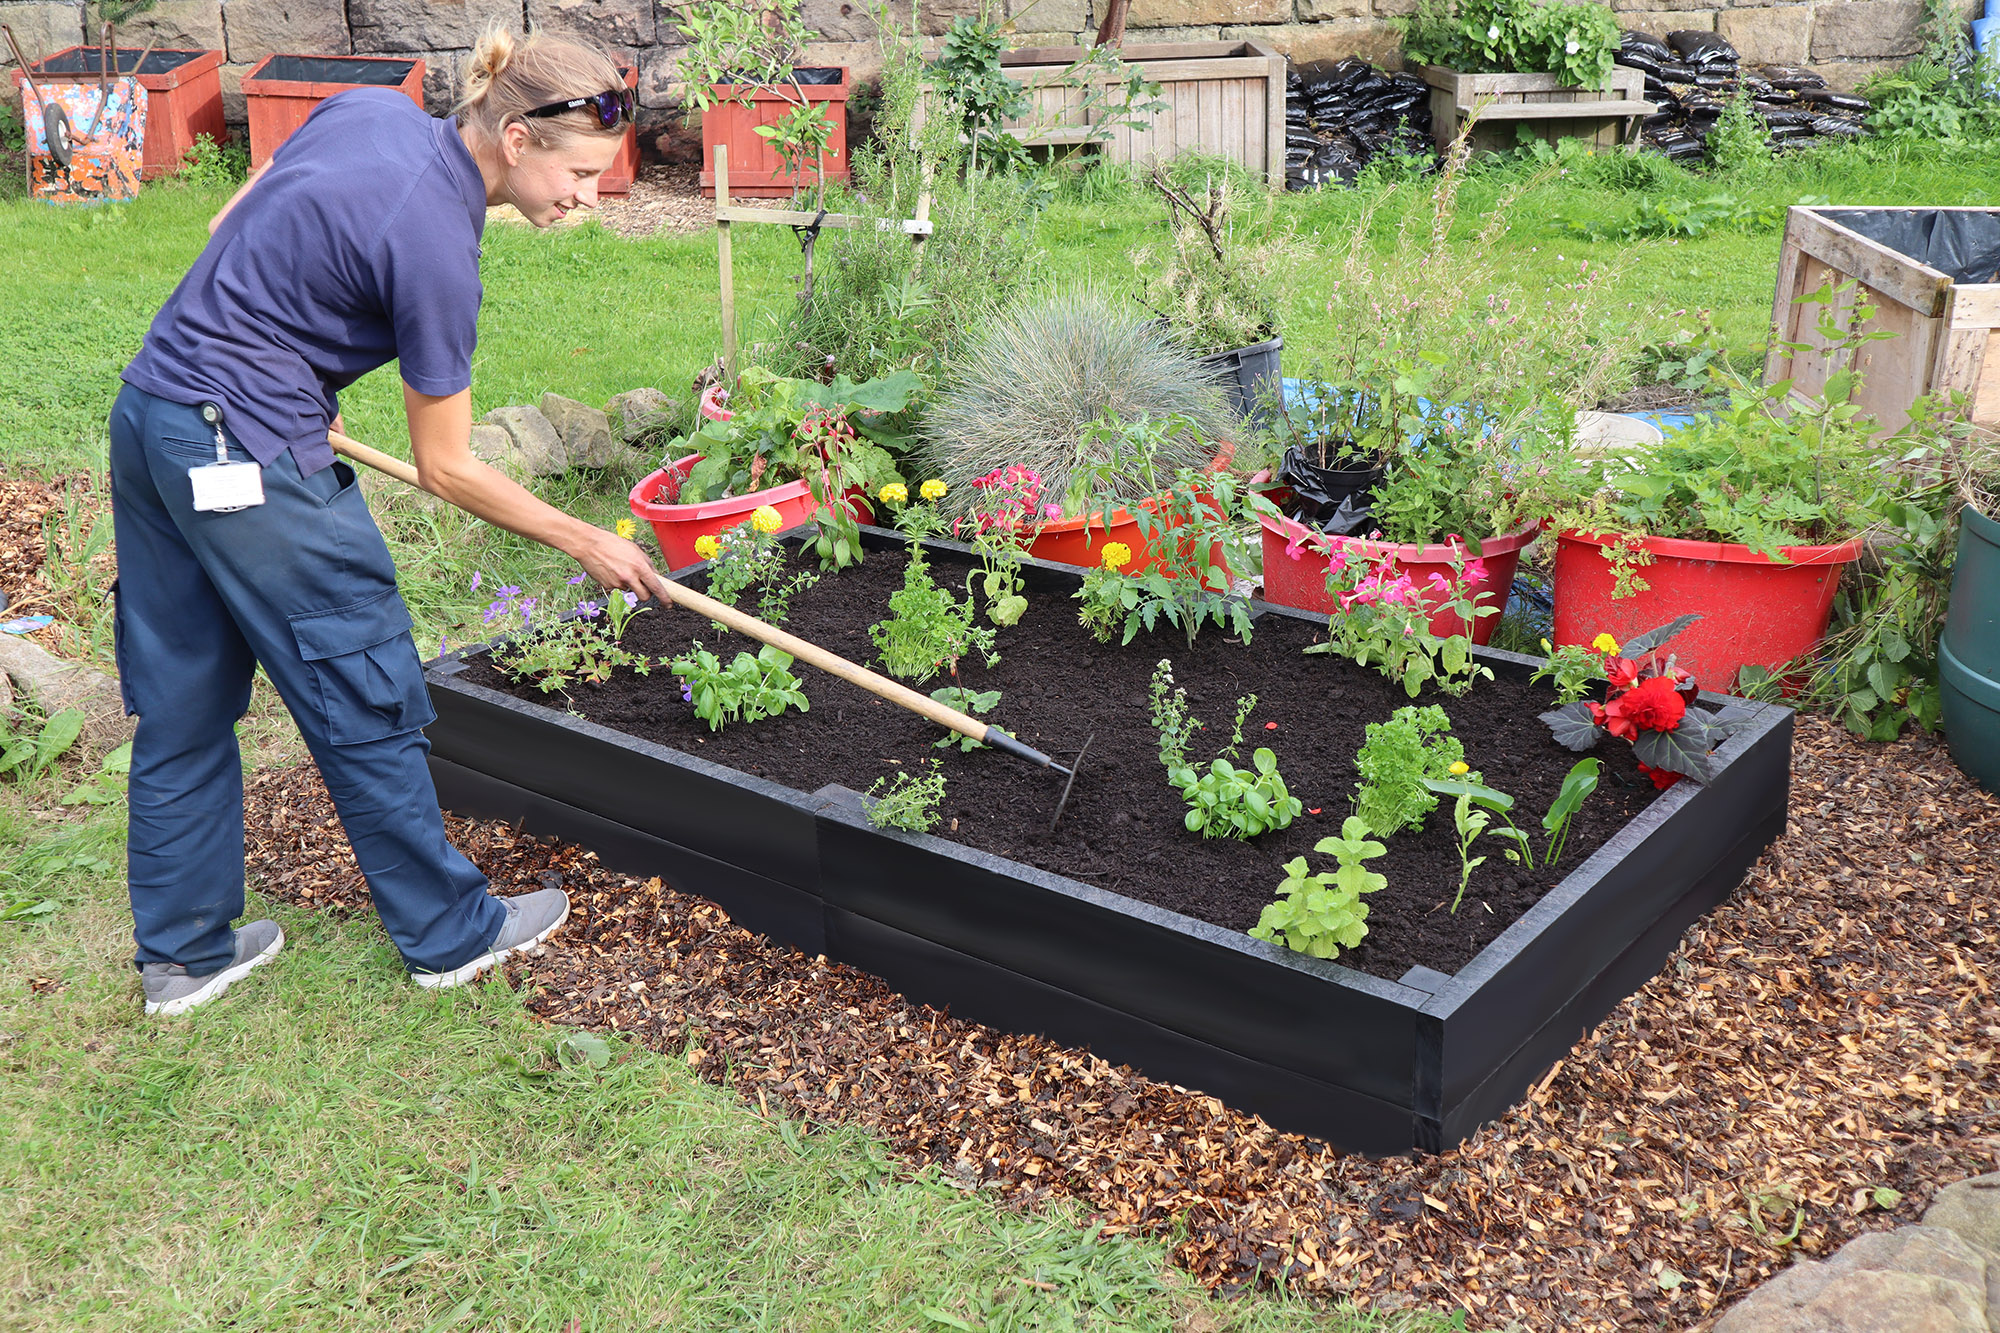 Martyna tending to a 2 metre x 1 metre recycled plastic raised bed, available with a 25 year guarantee from our webshop